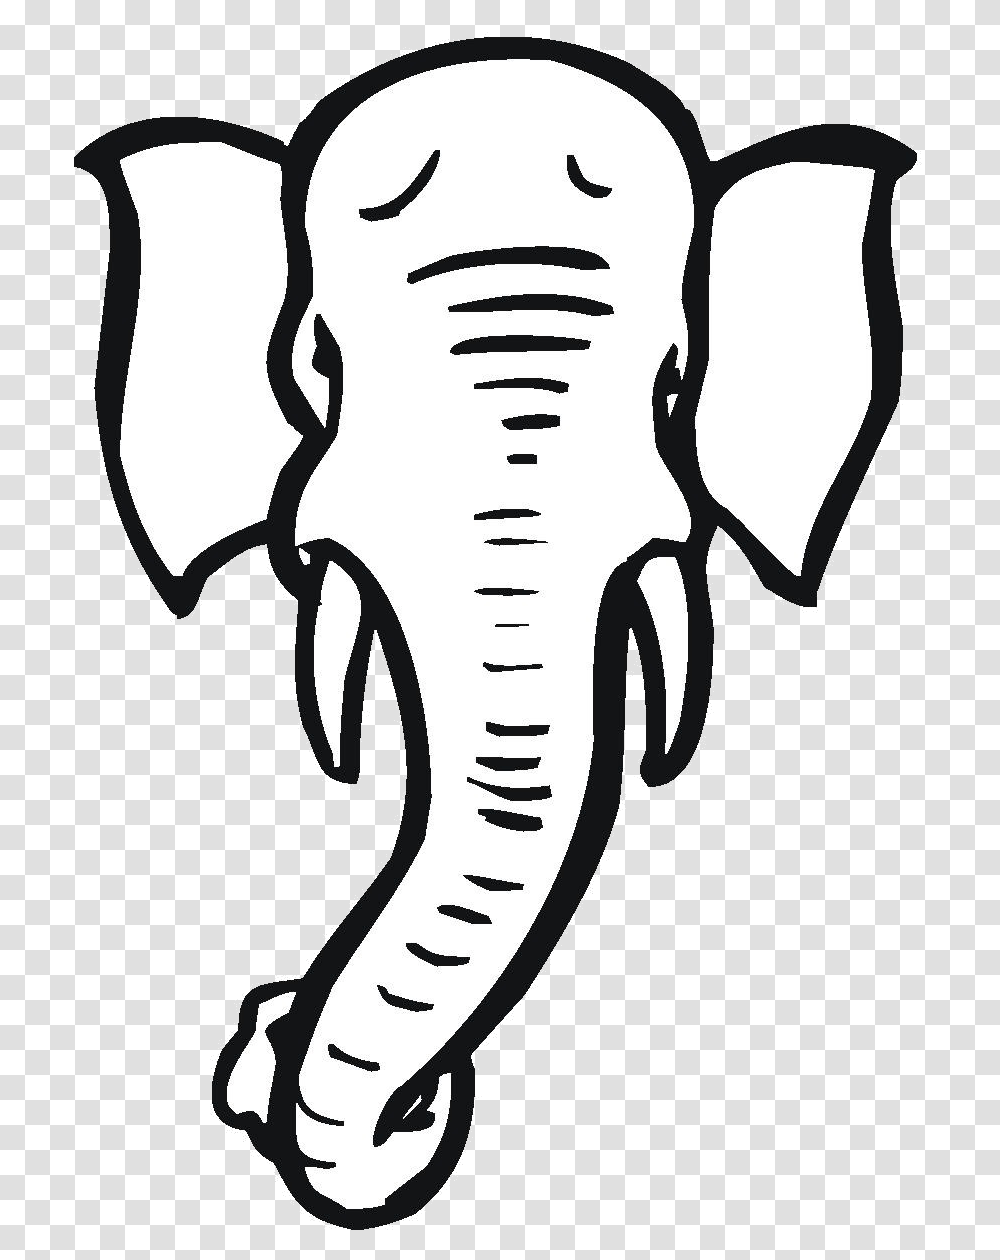 Elephant Best Cute Clipart Black And White Elephant Head Clipart Black And White, Label, Animal, Stencil Transparent Png